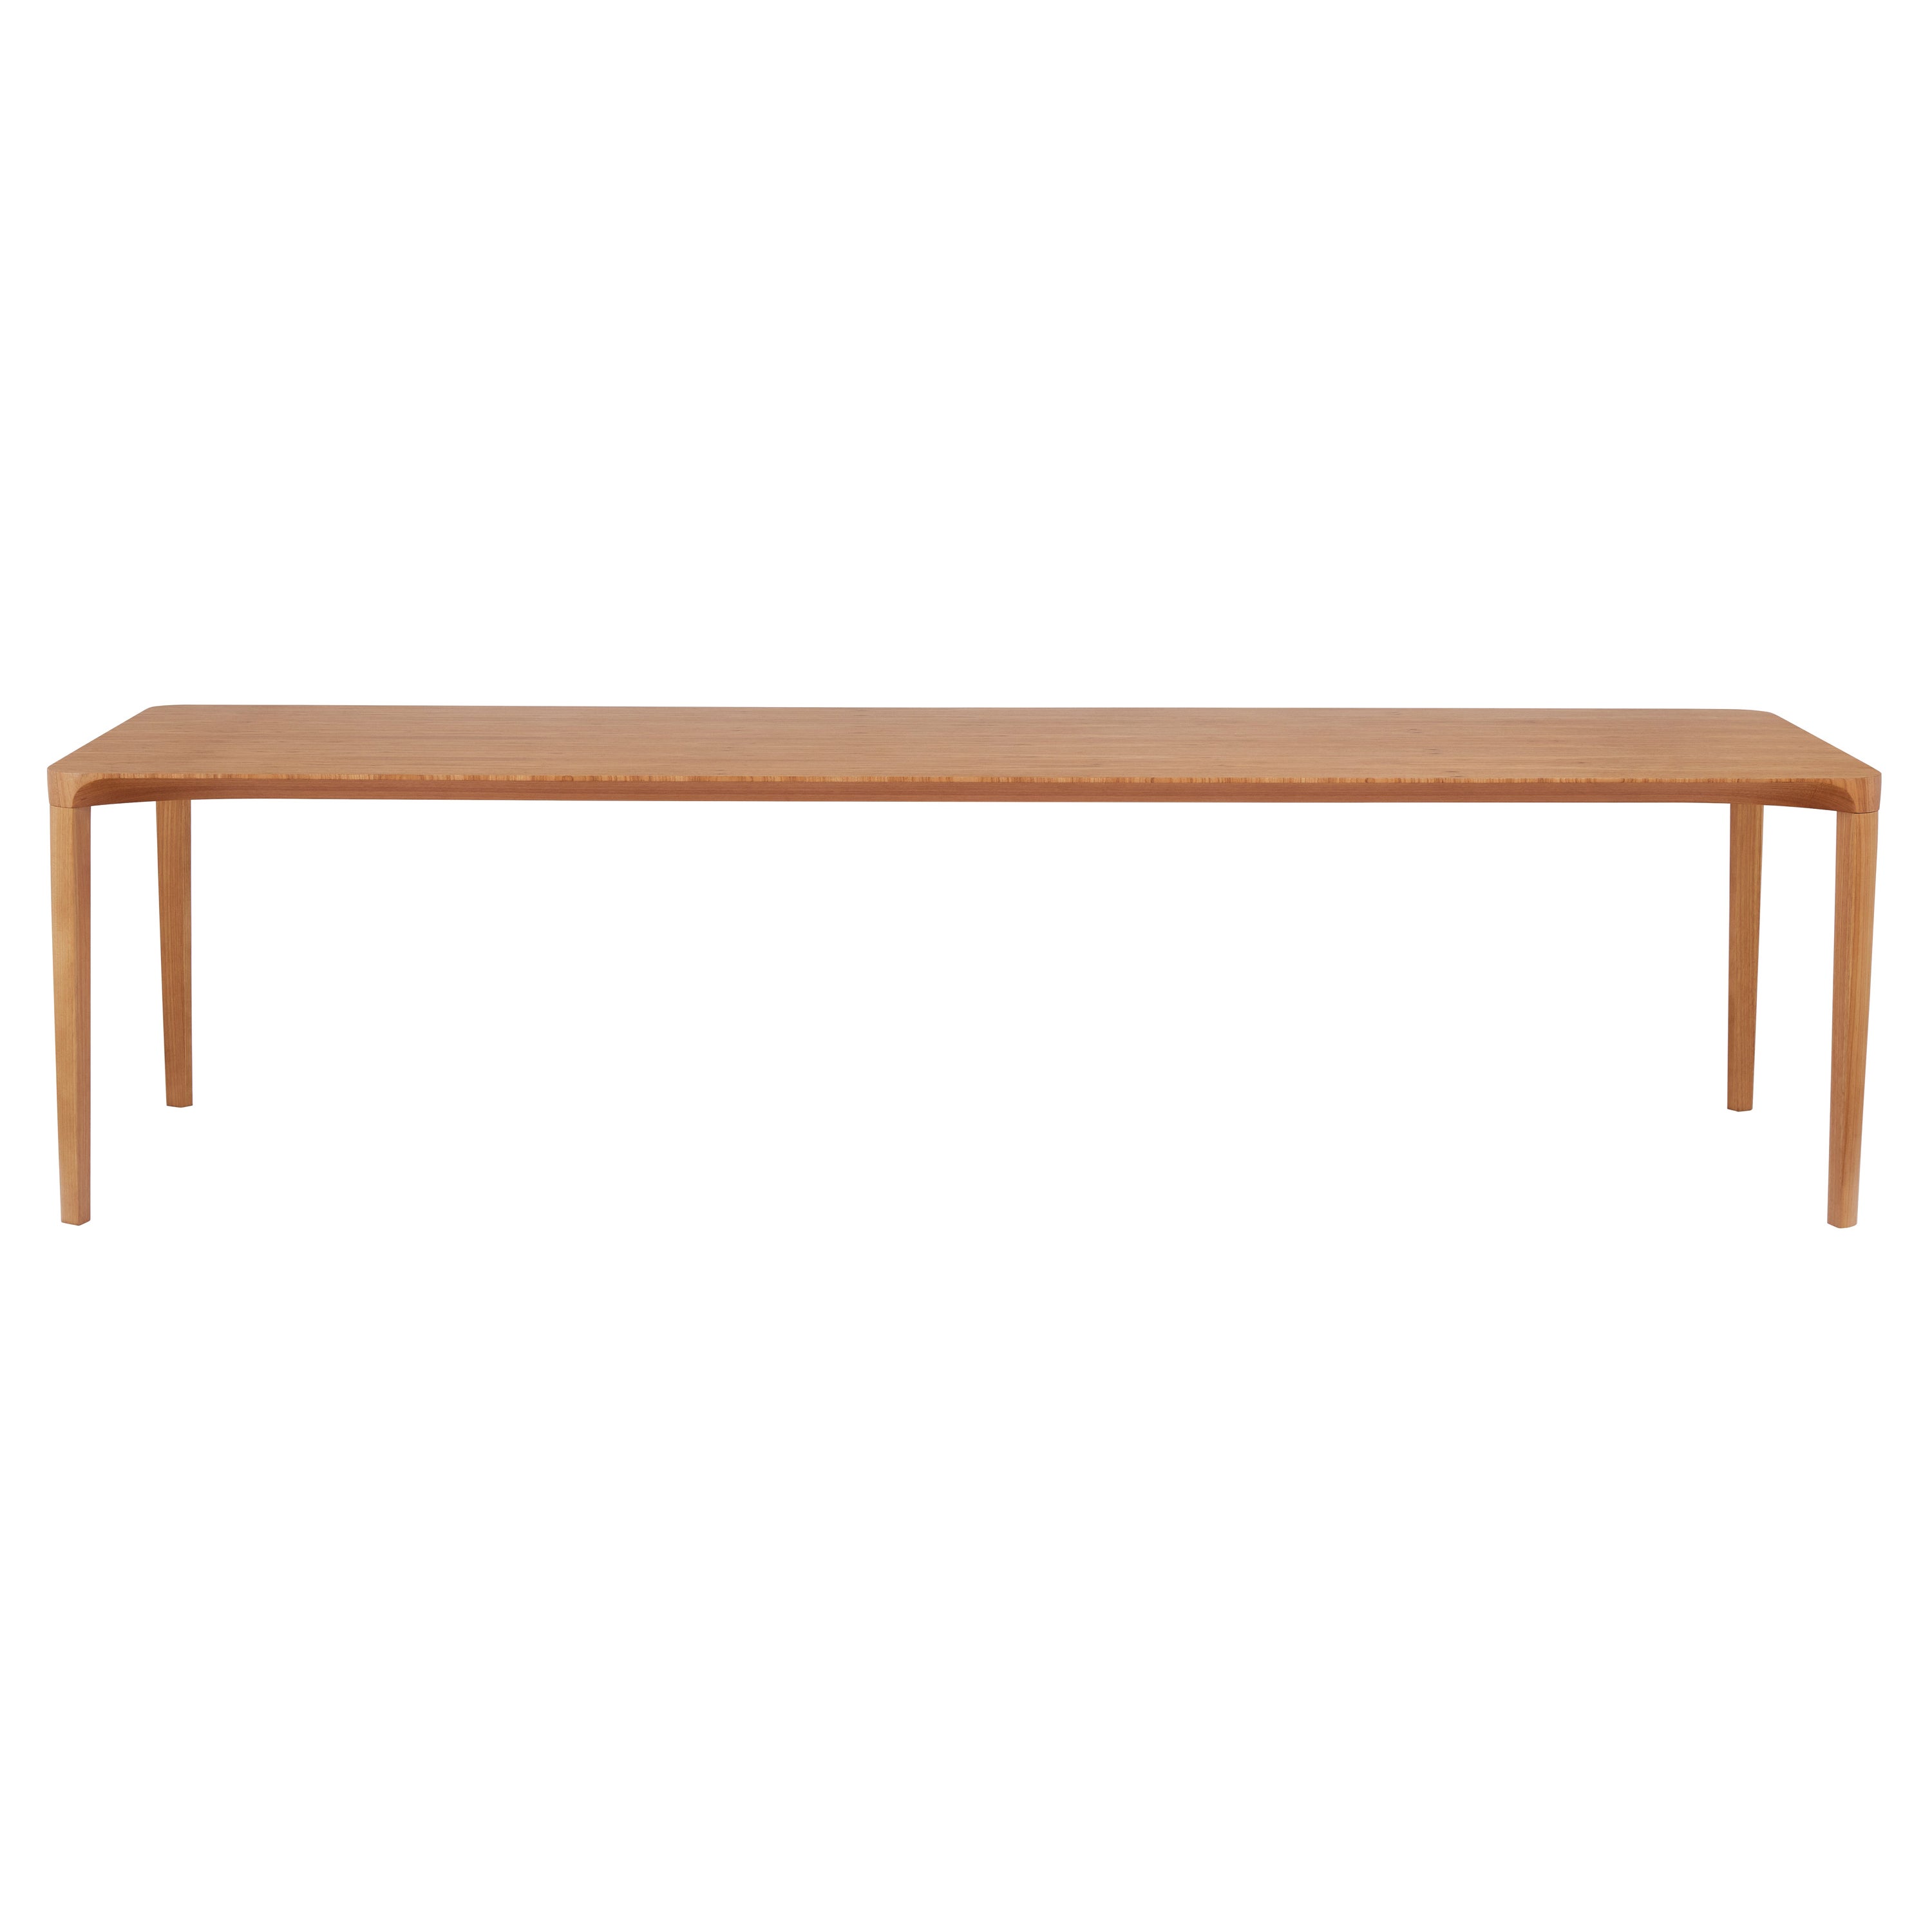 Minimalist Style, Dining Table in Natural Solid Wood Reinforced with Steel For Sale